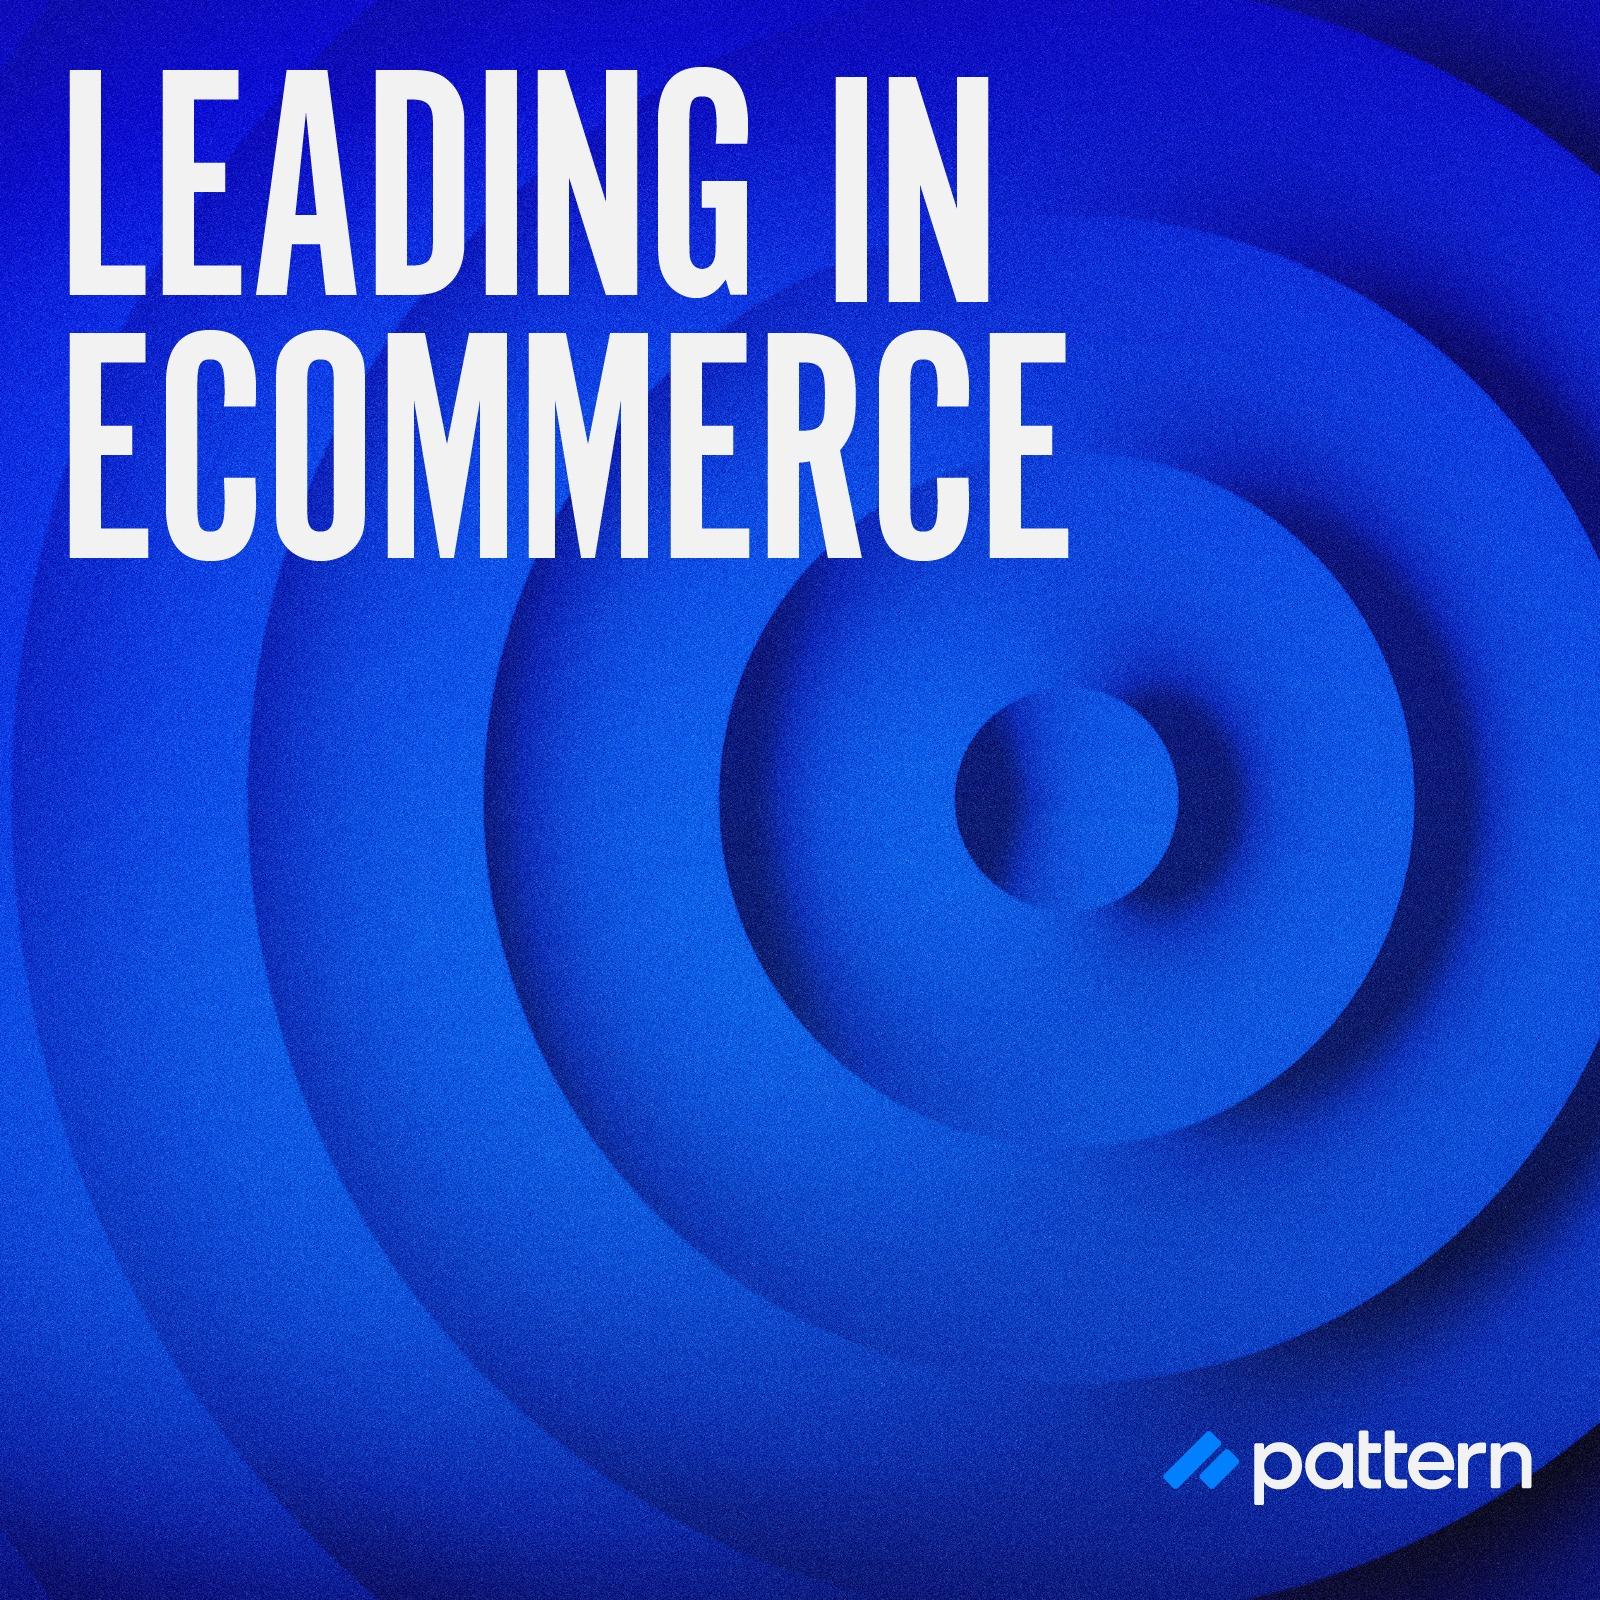 Leading in Ecommerce